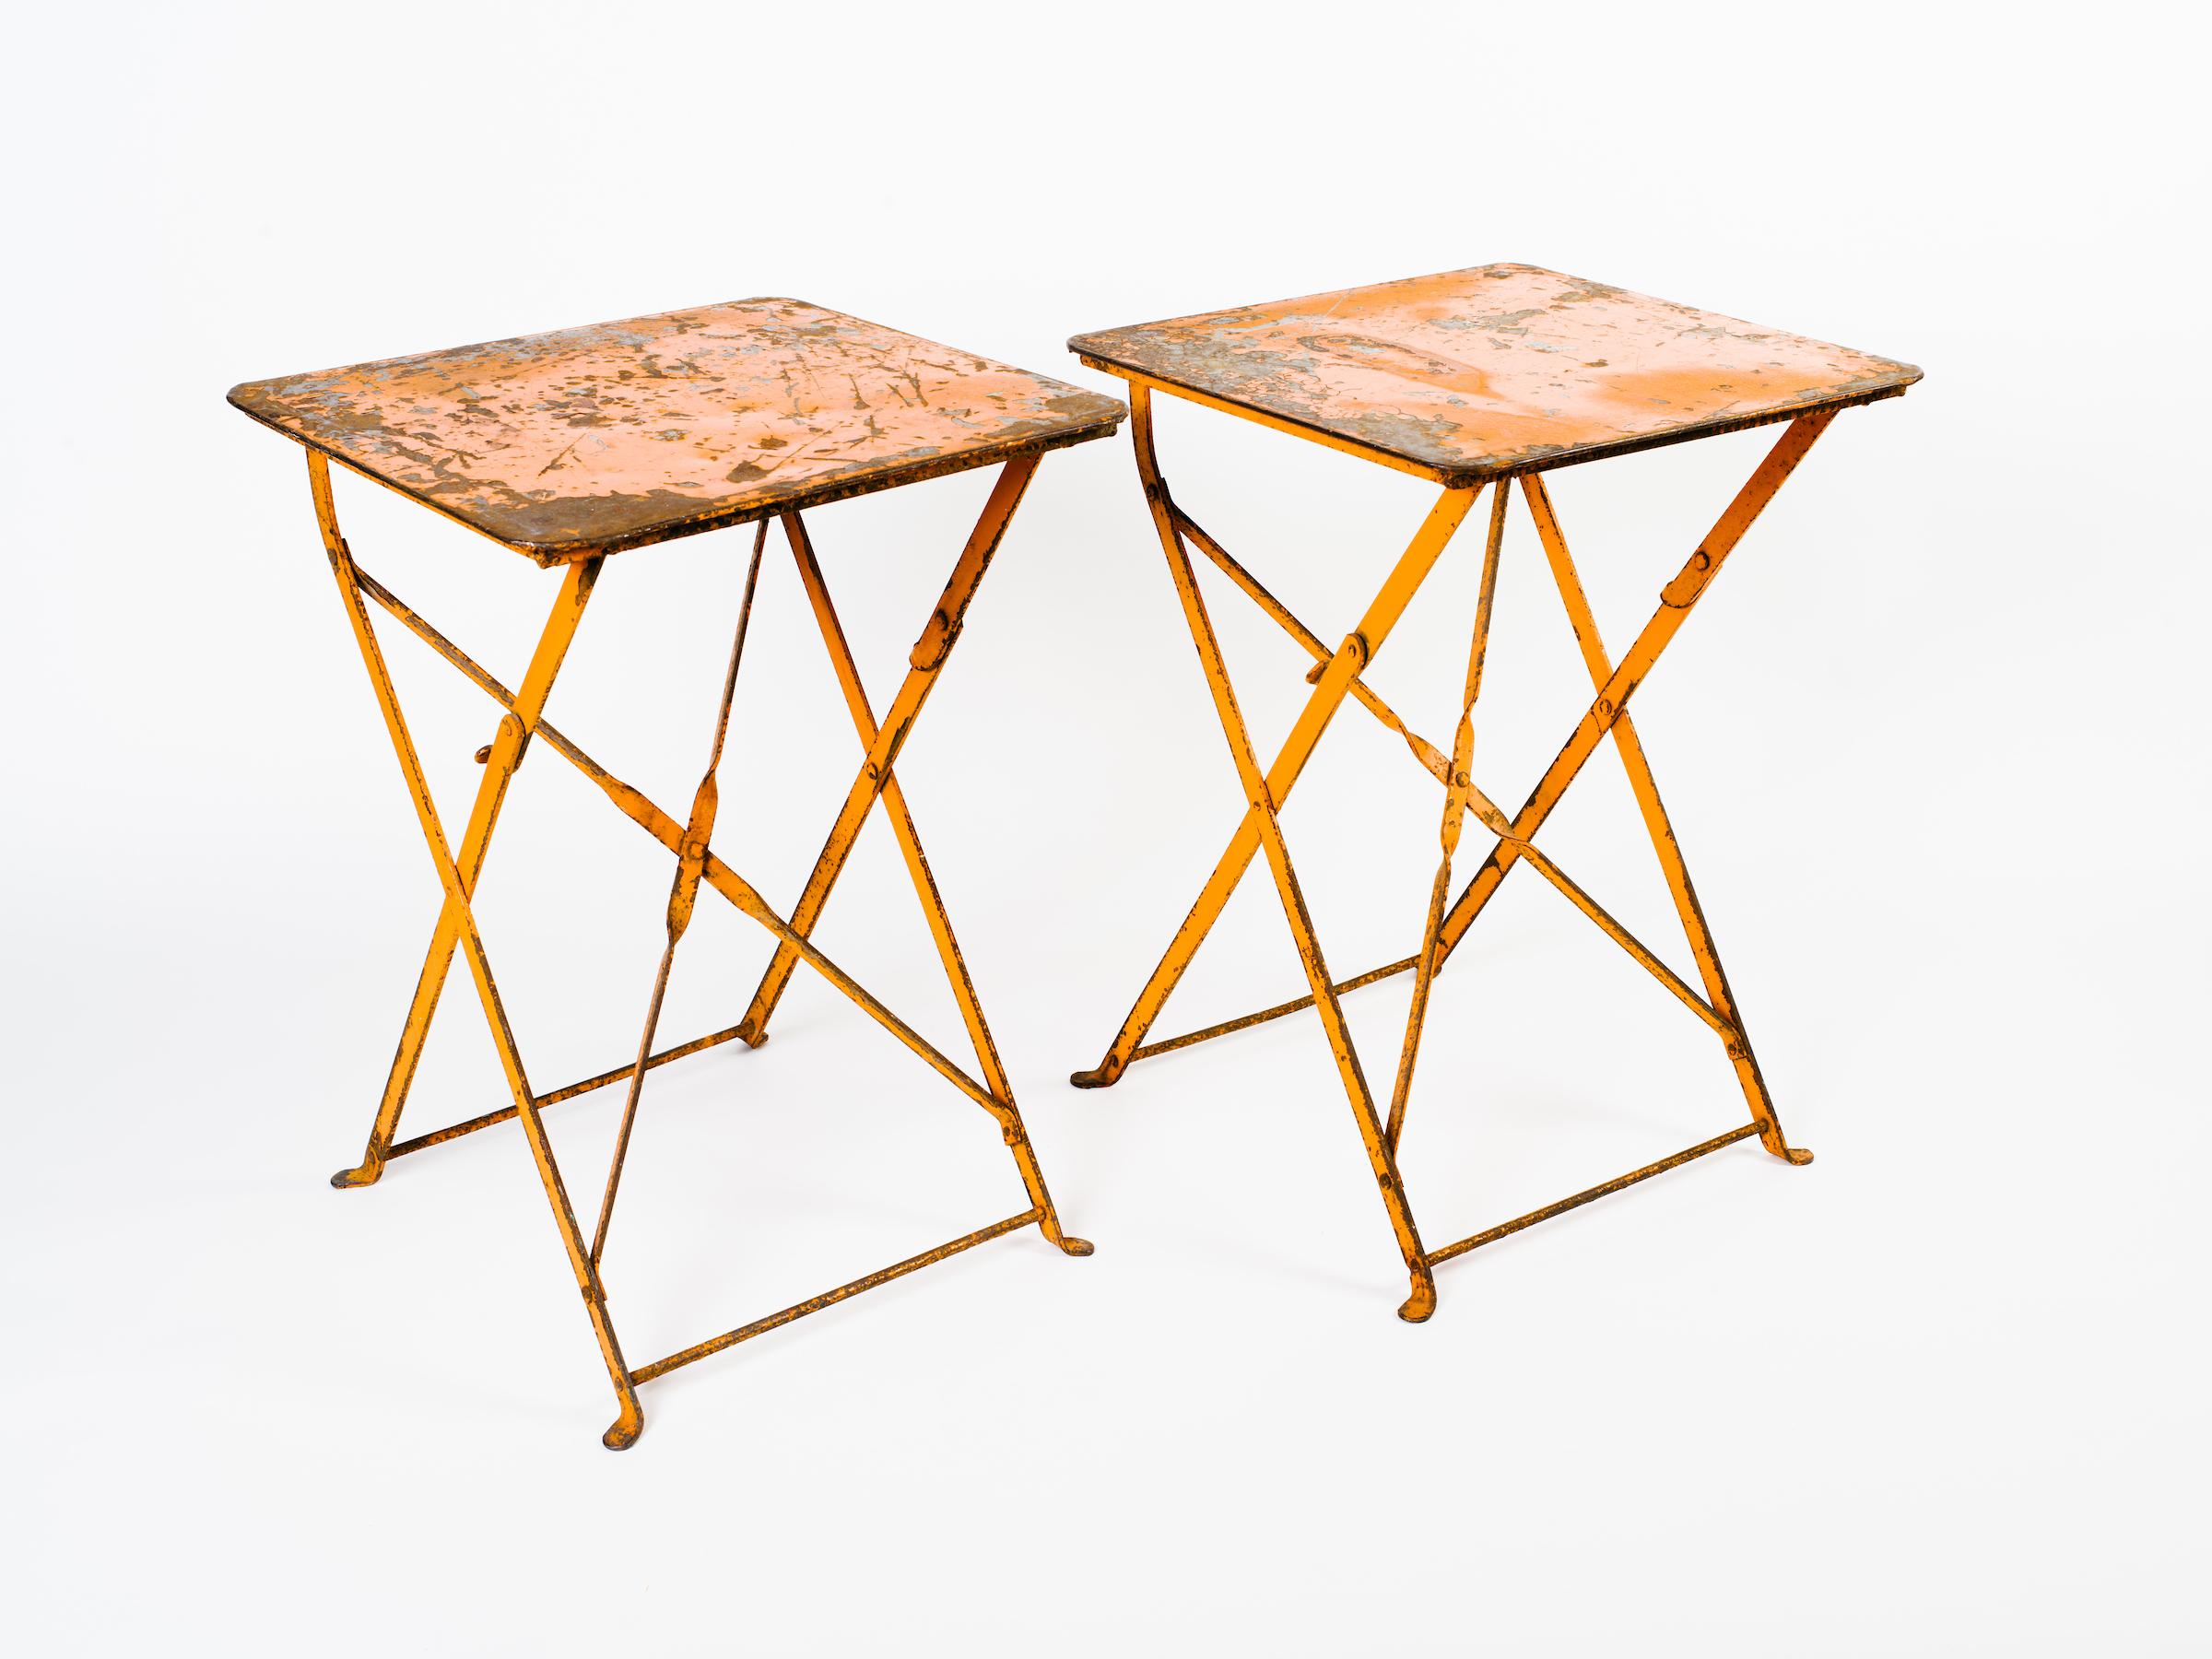 Pair of industrial French folding iron garden tables with beautiful patina on the metal in original orange enamel. Exhibits wear and distress on the paint throughout, adding to their rustic charm and beauty. Can be used indoors as side tables or